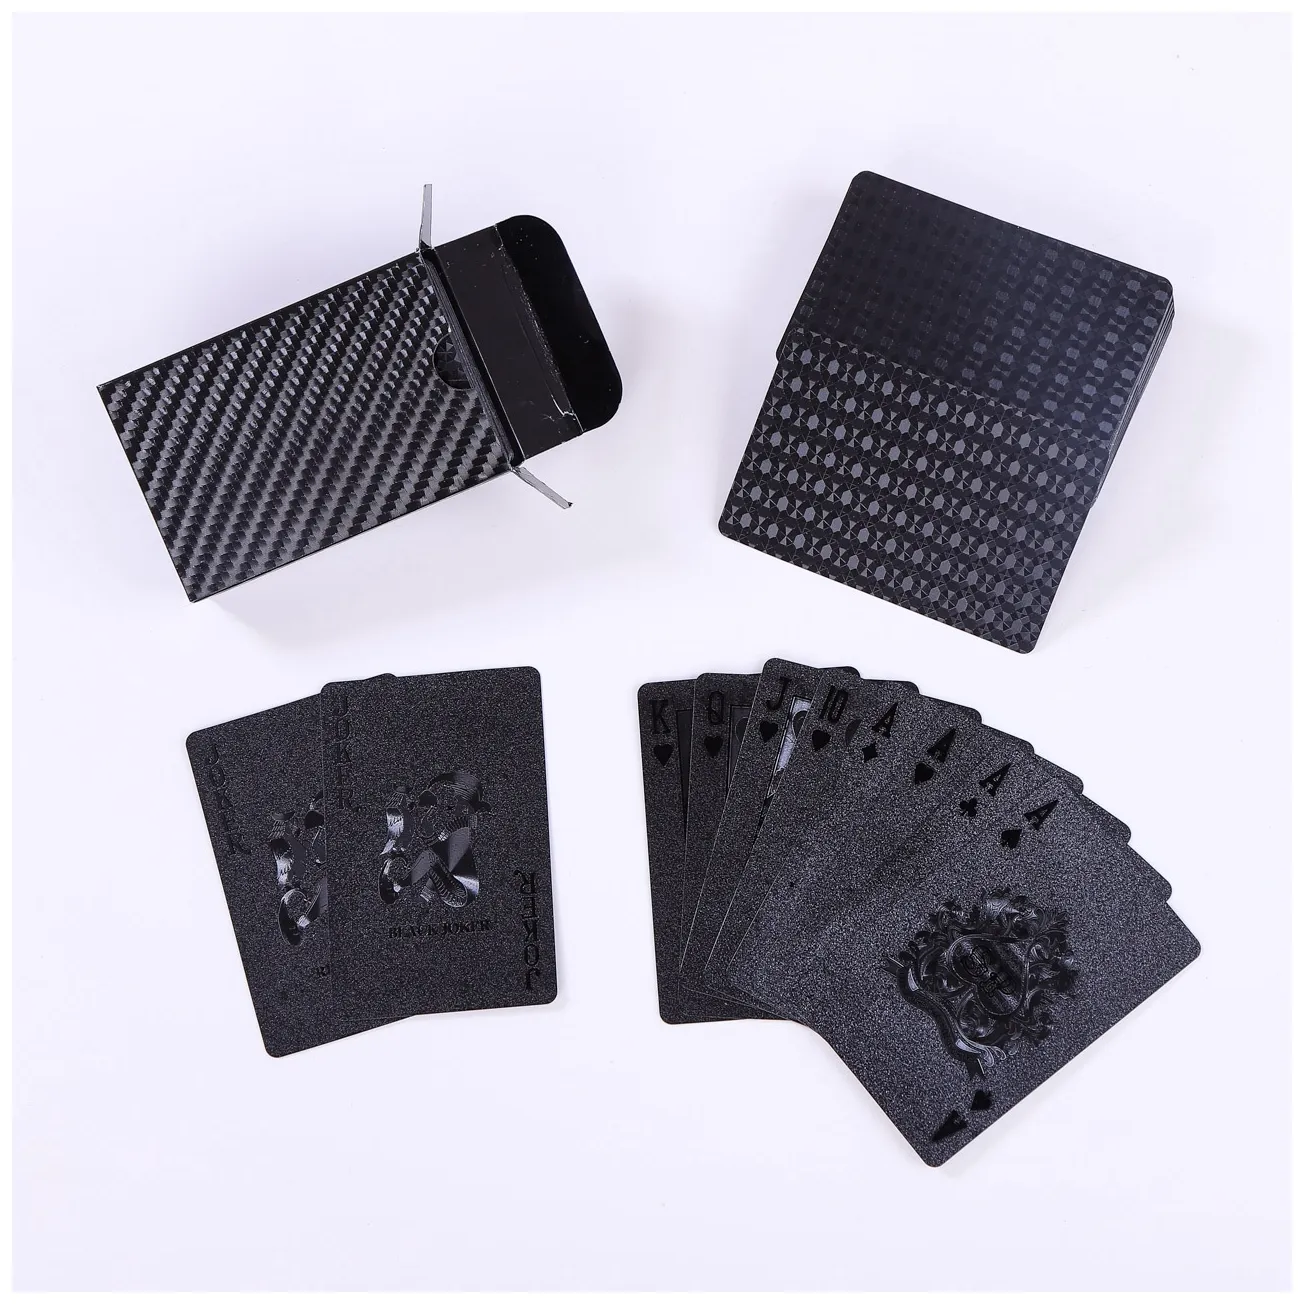 Solid color never deformed playing cards poker foldable Black Foil poker playing cards